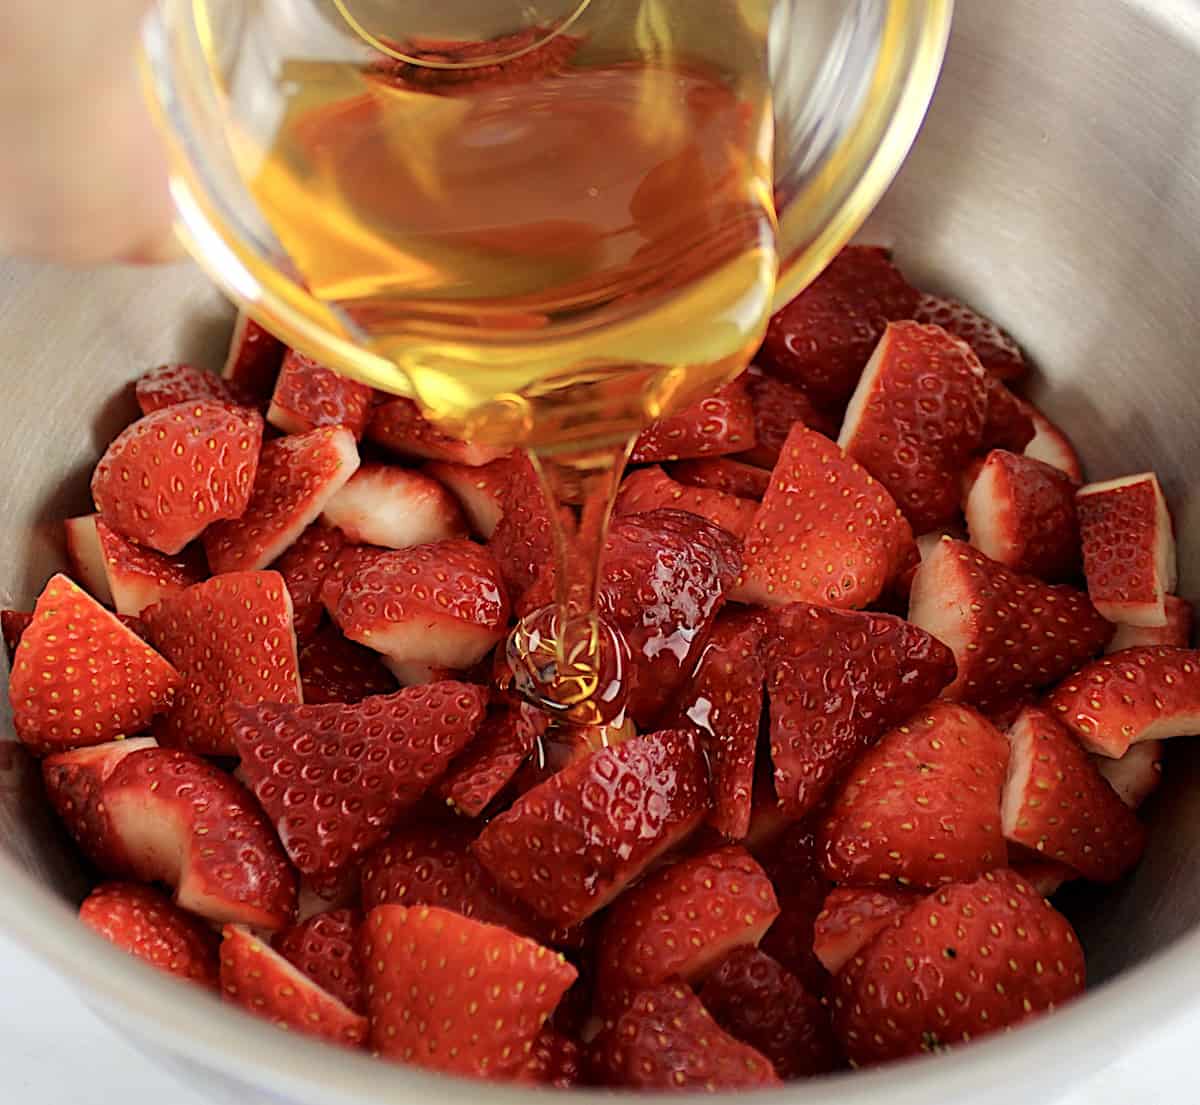 chopped strawberries in saucepan with honey being poured over